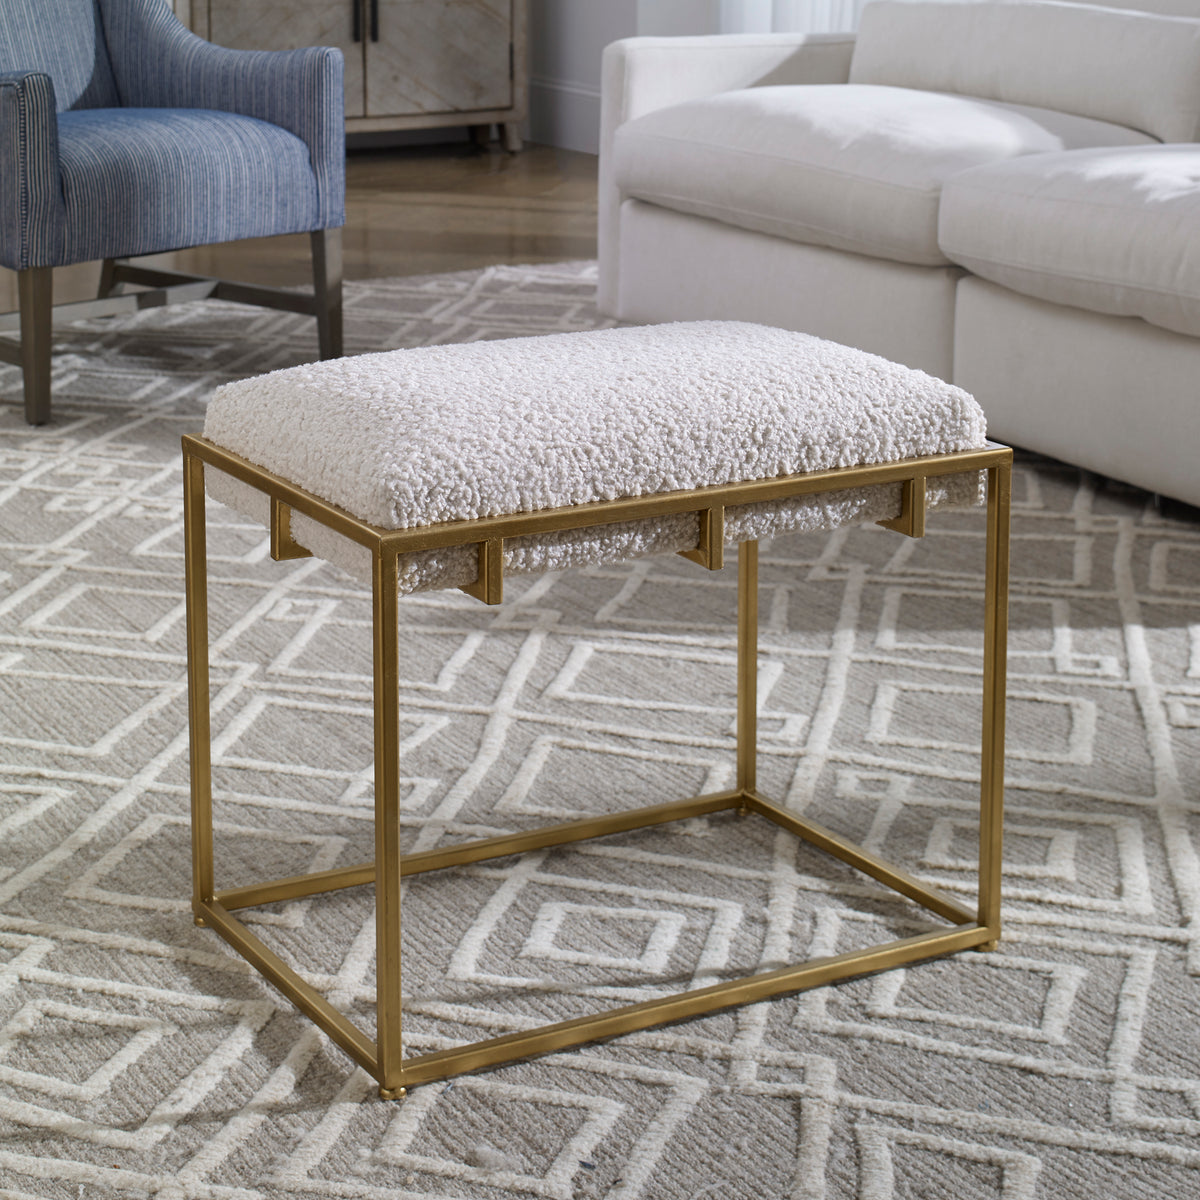 Uttermost Paradox Small Gold & White Shearling Bench